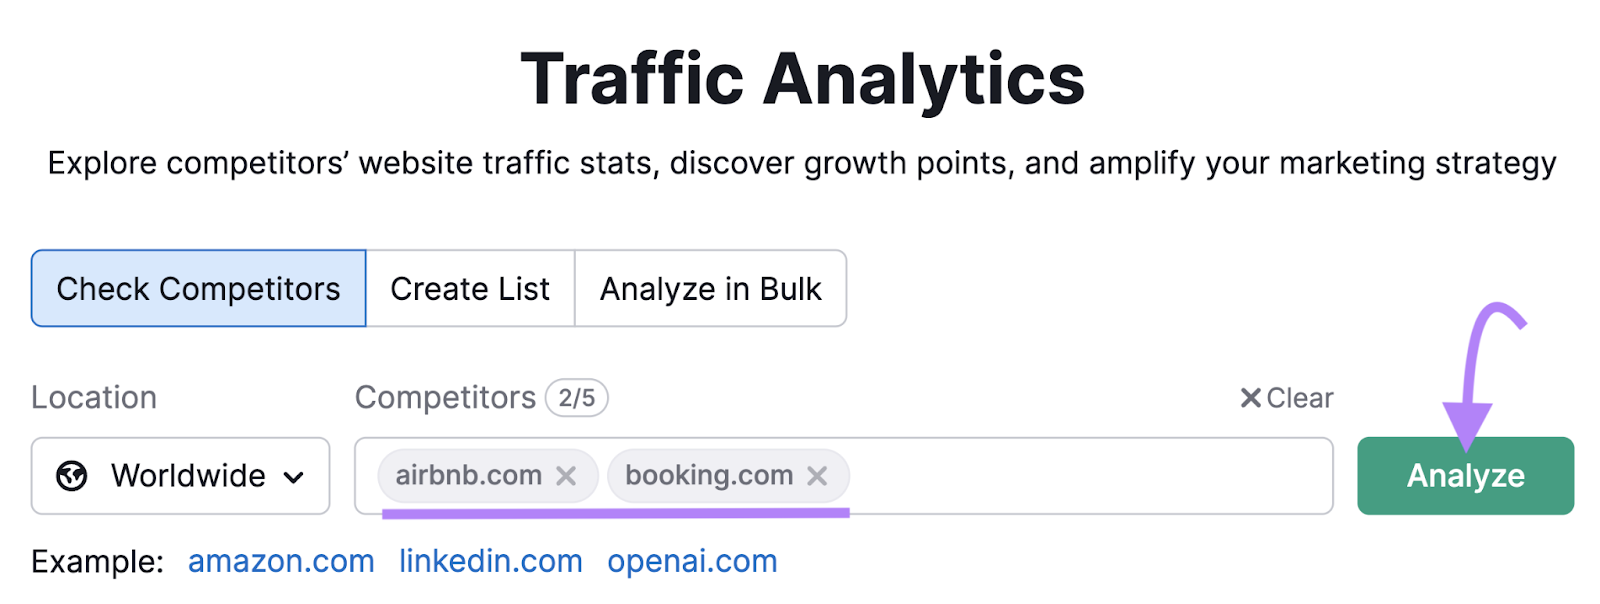 "airbnb.com" and "booking.com" entered in Traffic Analytics tool search bar